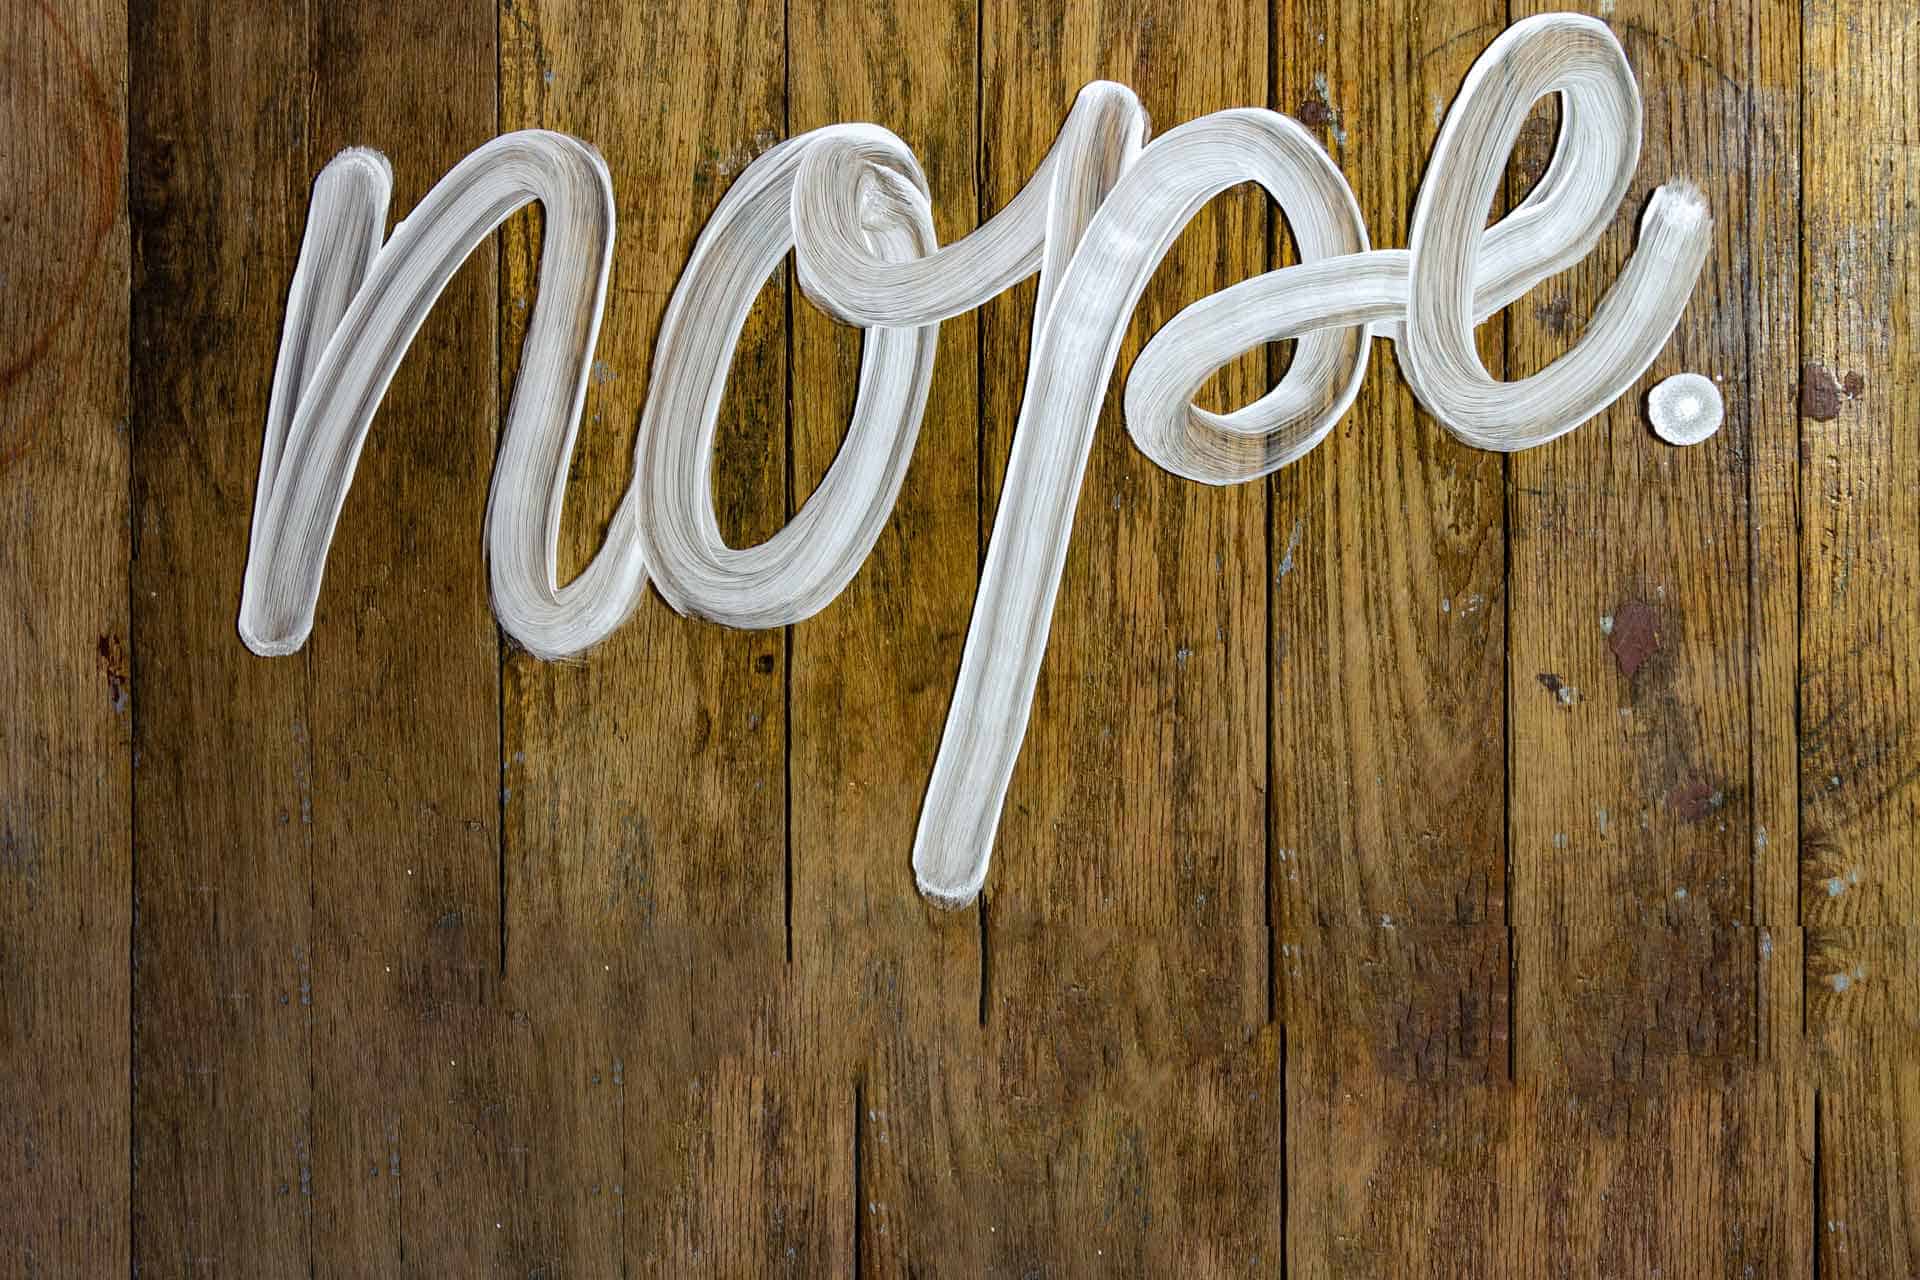 The word "nope" written in white paint against a wooden background. No place for typography mistakes!